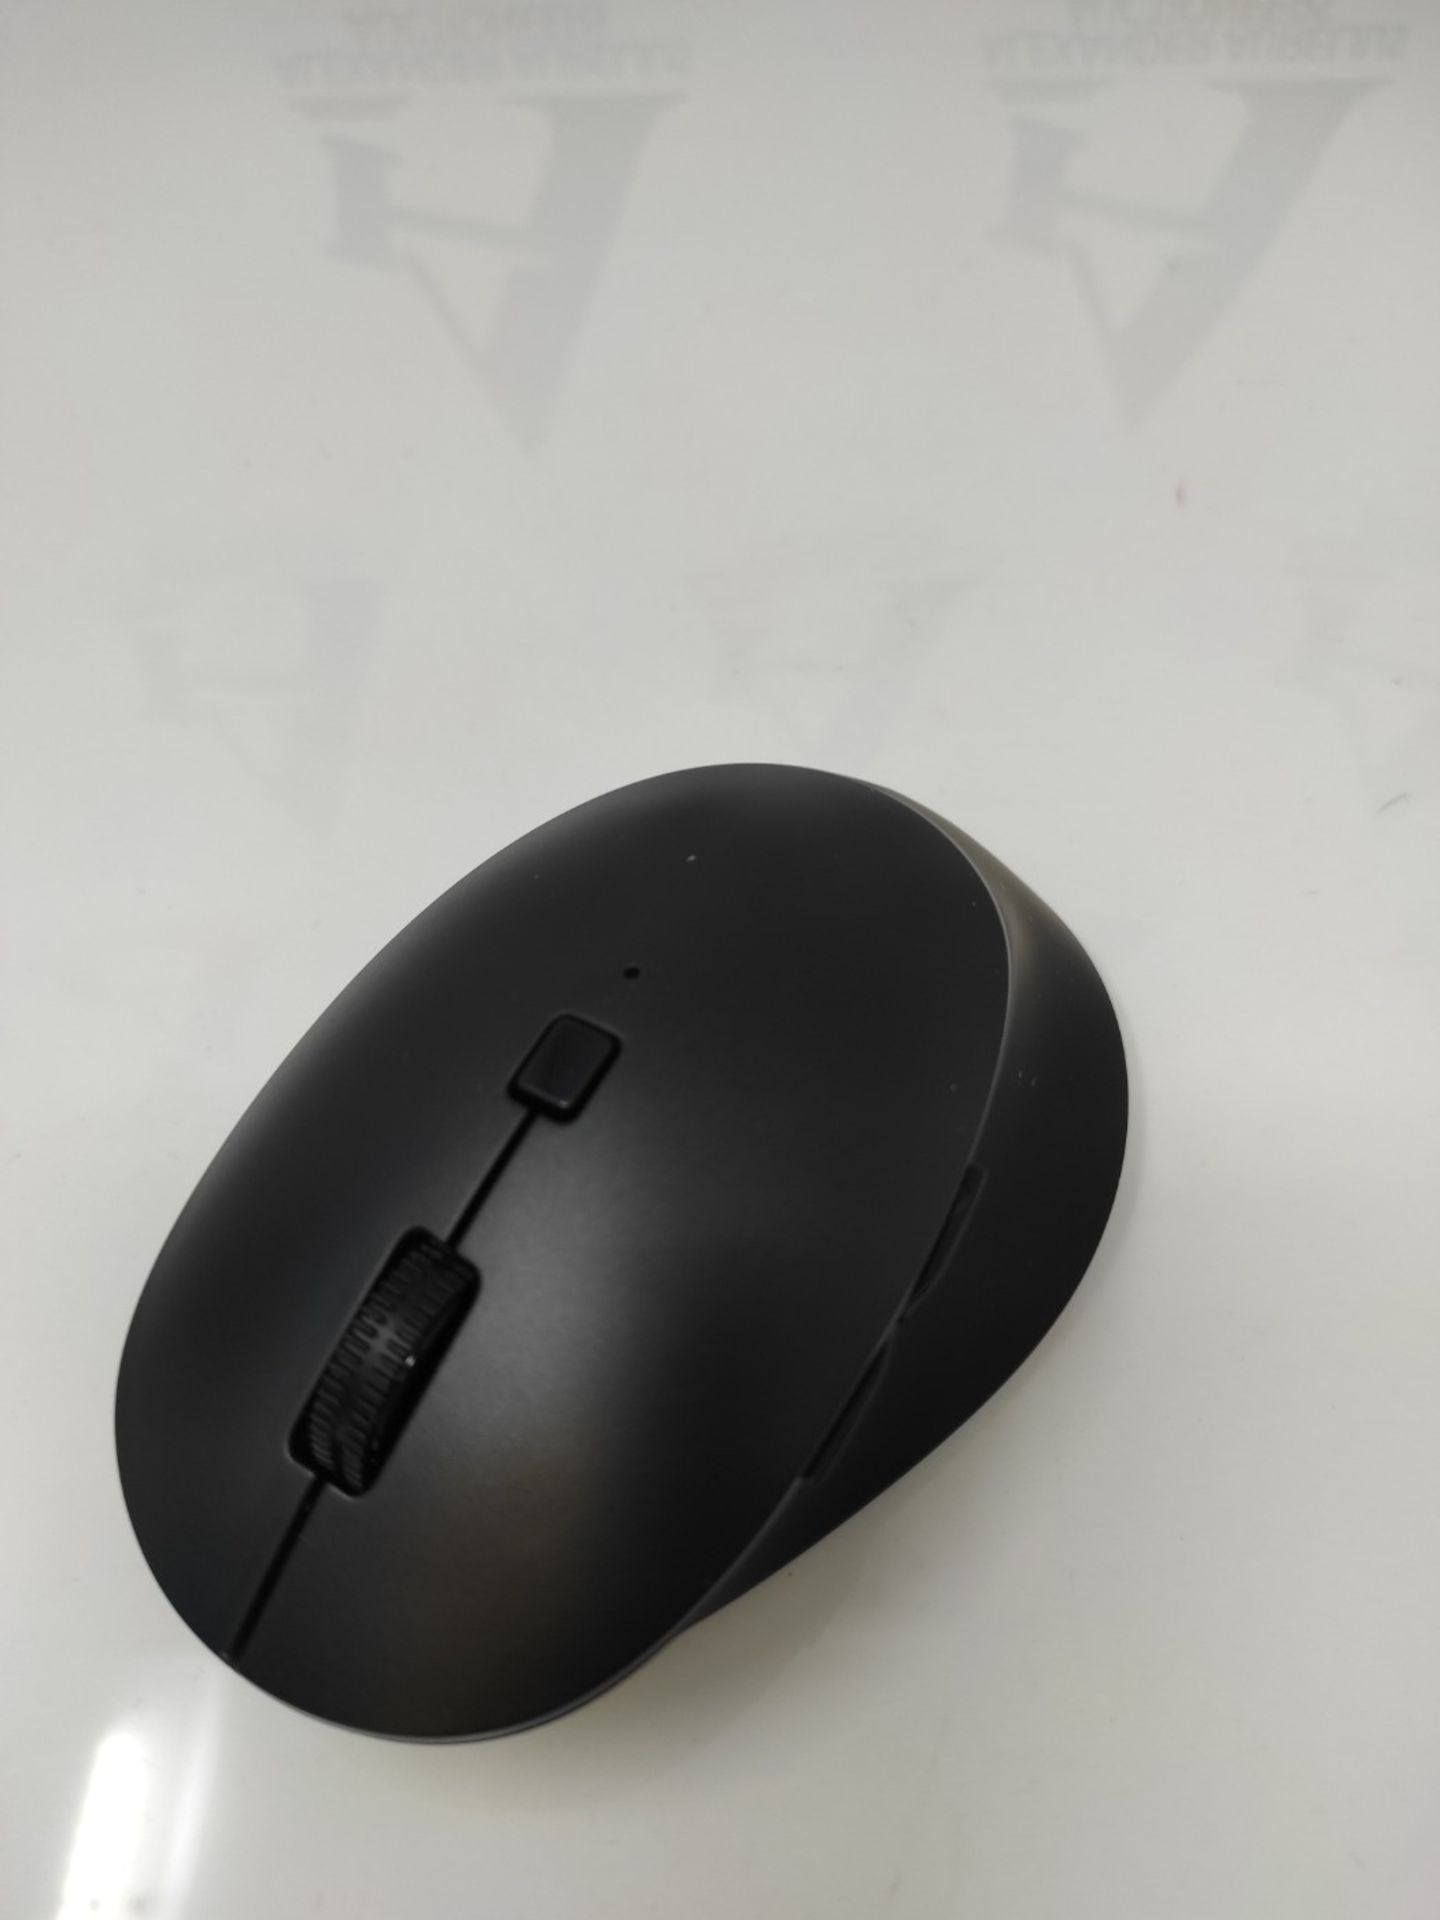 Philips SPK7607 Wireless Mouse - up to 3200 dpi, 2.4 GHz + Bluetooth 3.0/5.0, Silent C - Image 3 of 3